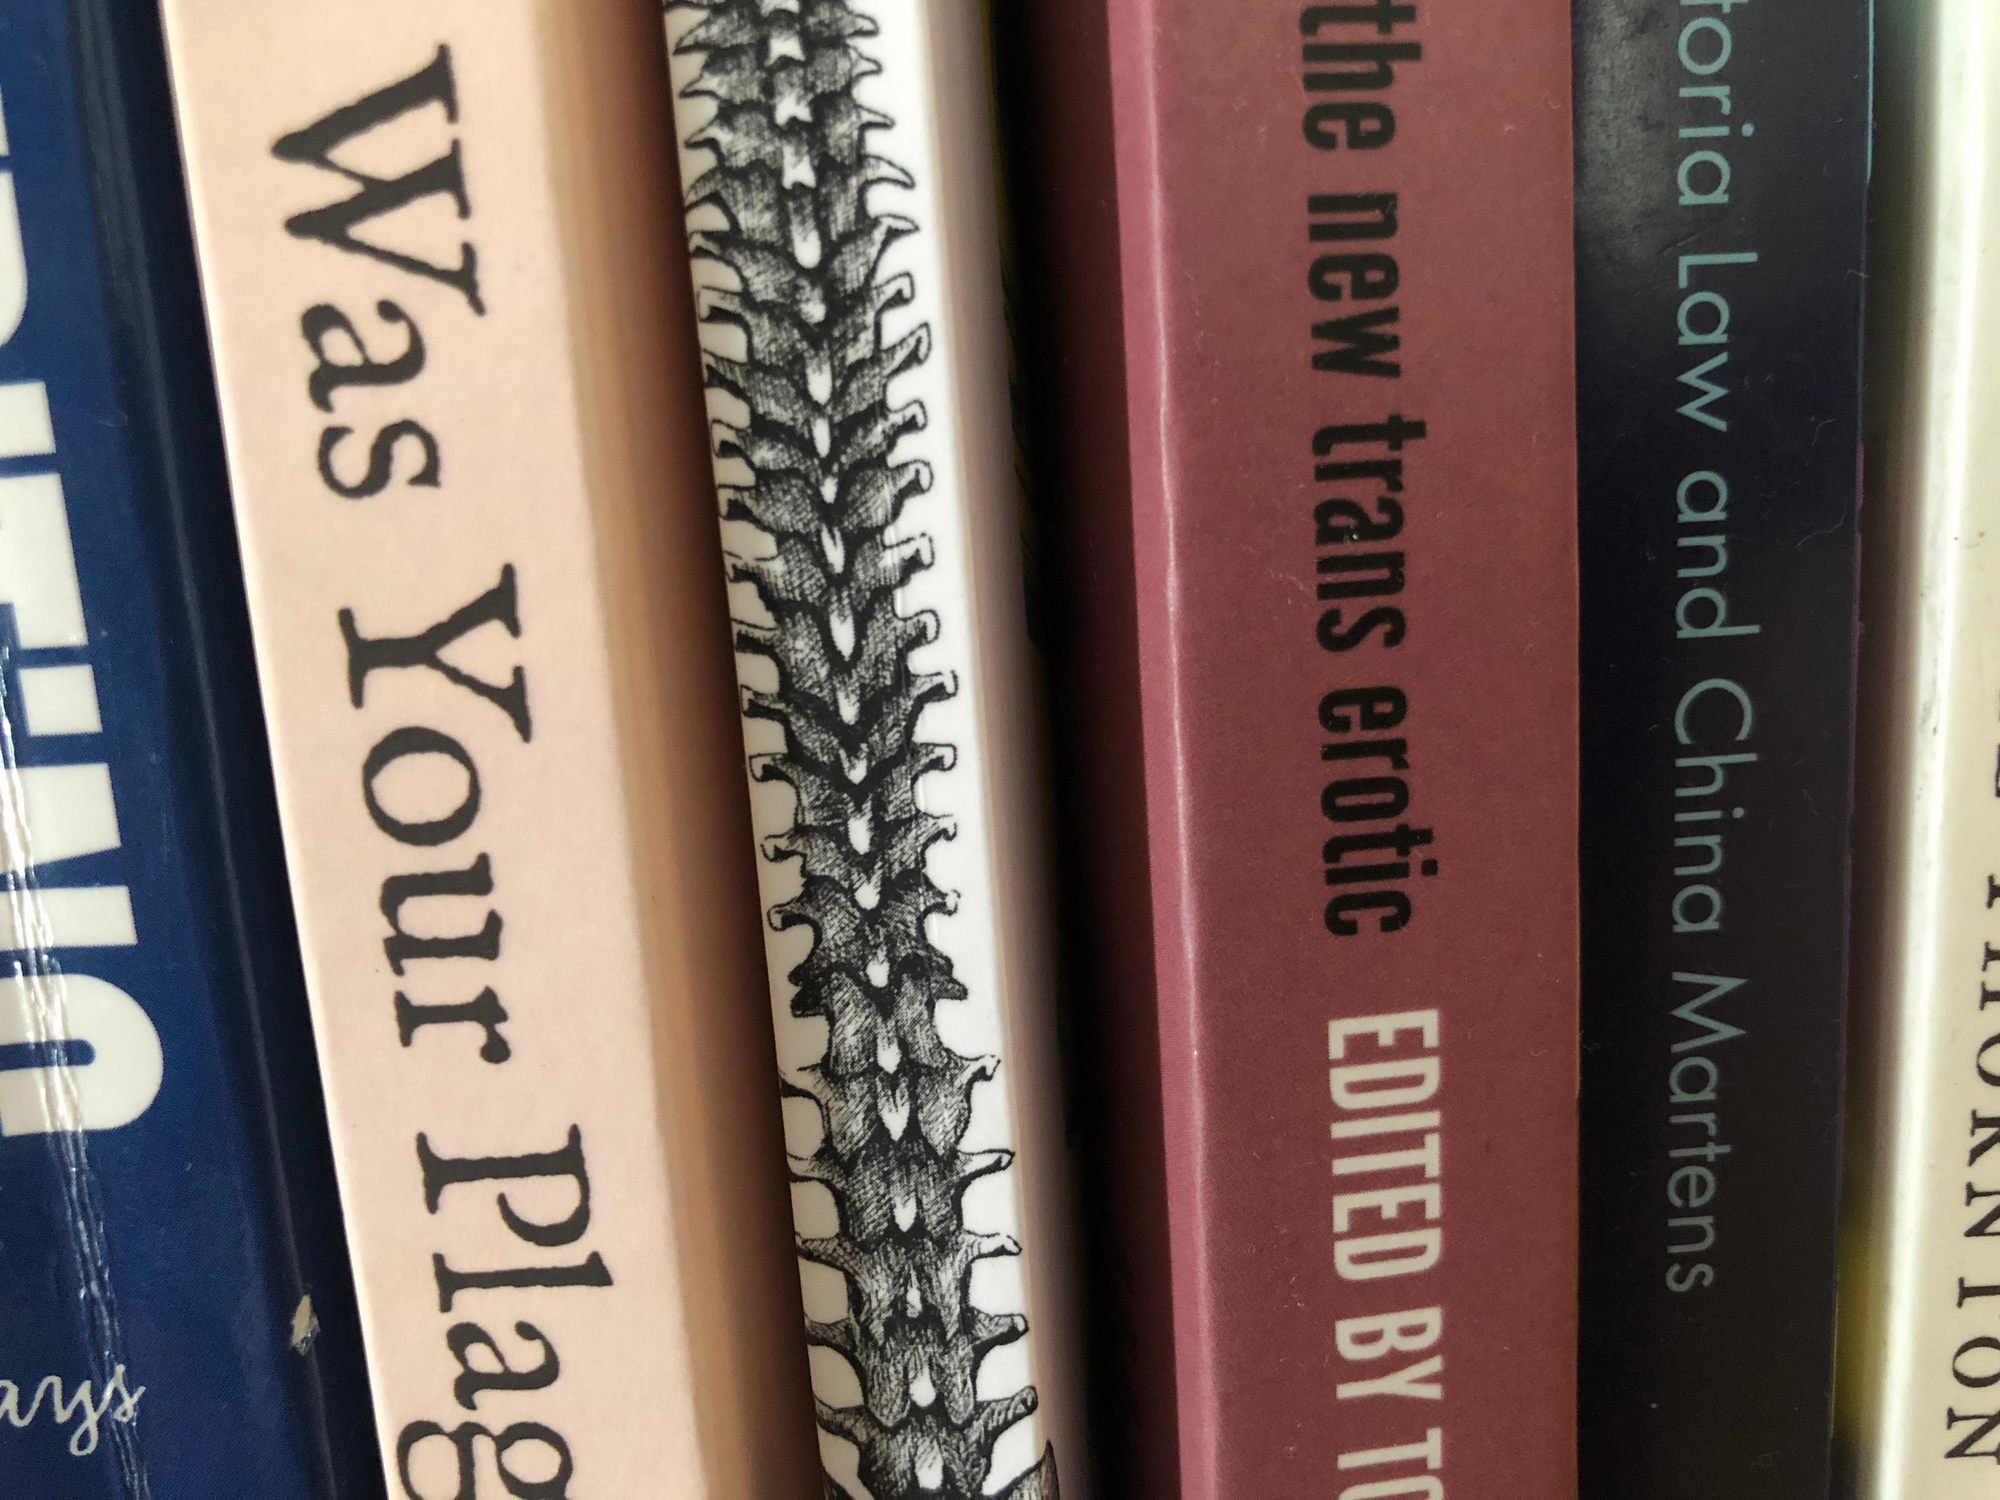 close-up photo of the middle of the spines of six books, the second reads "Was Your Plag", the fourth reads "the new trans erotic EDITED BY T", the fifth "oria Law and China Martens". taken at the robledo art, strike! headquarters, february 2023.